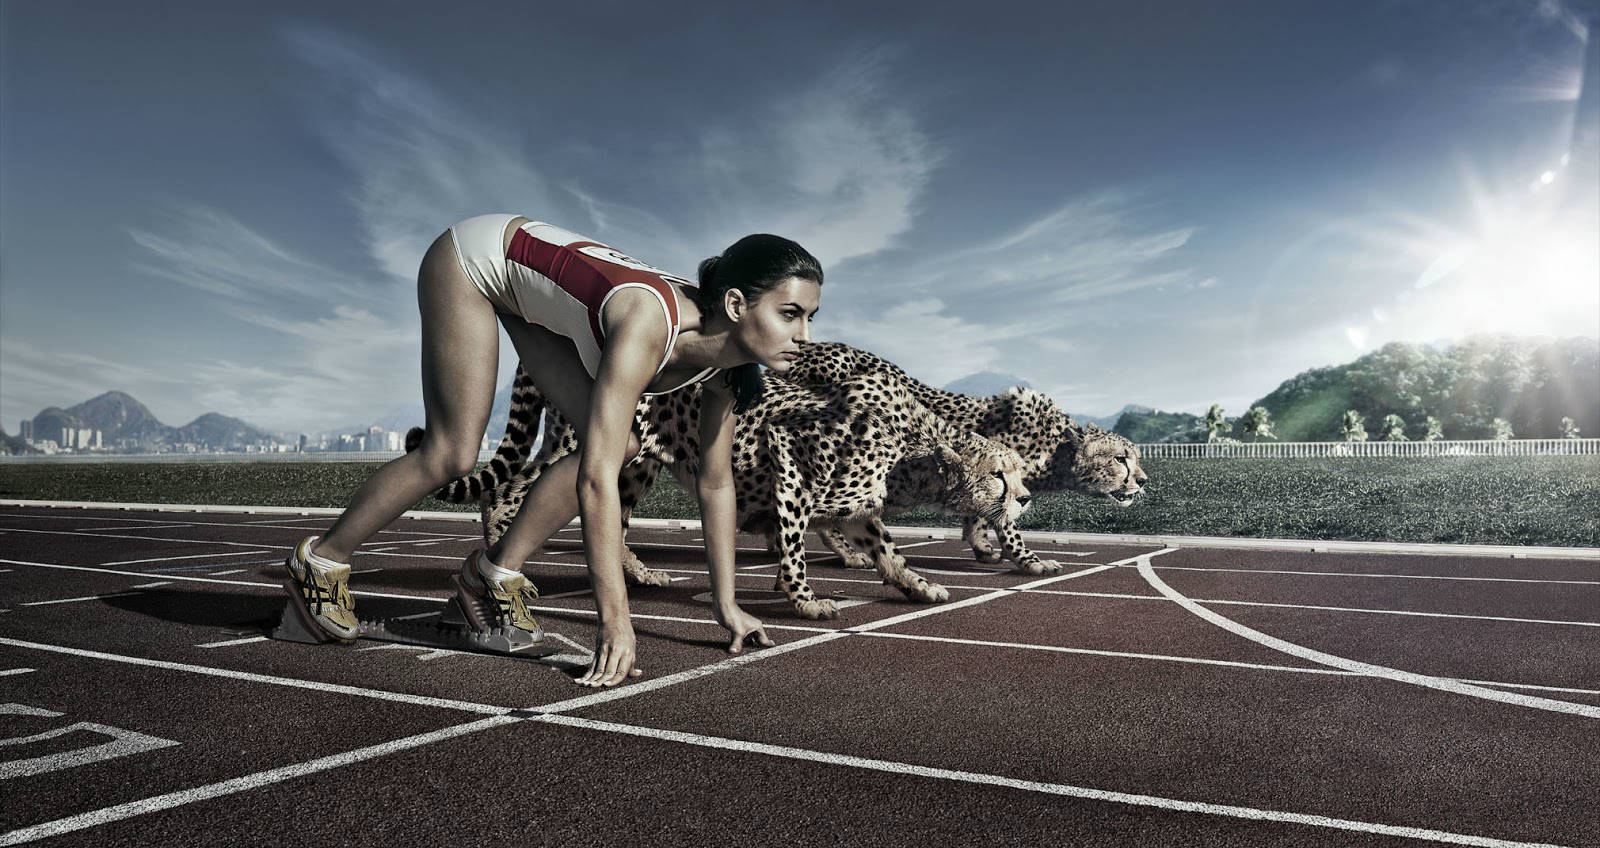 hd-wallpaper-with-woman-running-with-cheetahs-on-running-track.jpg